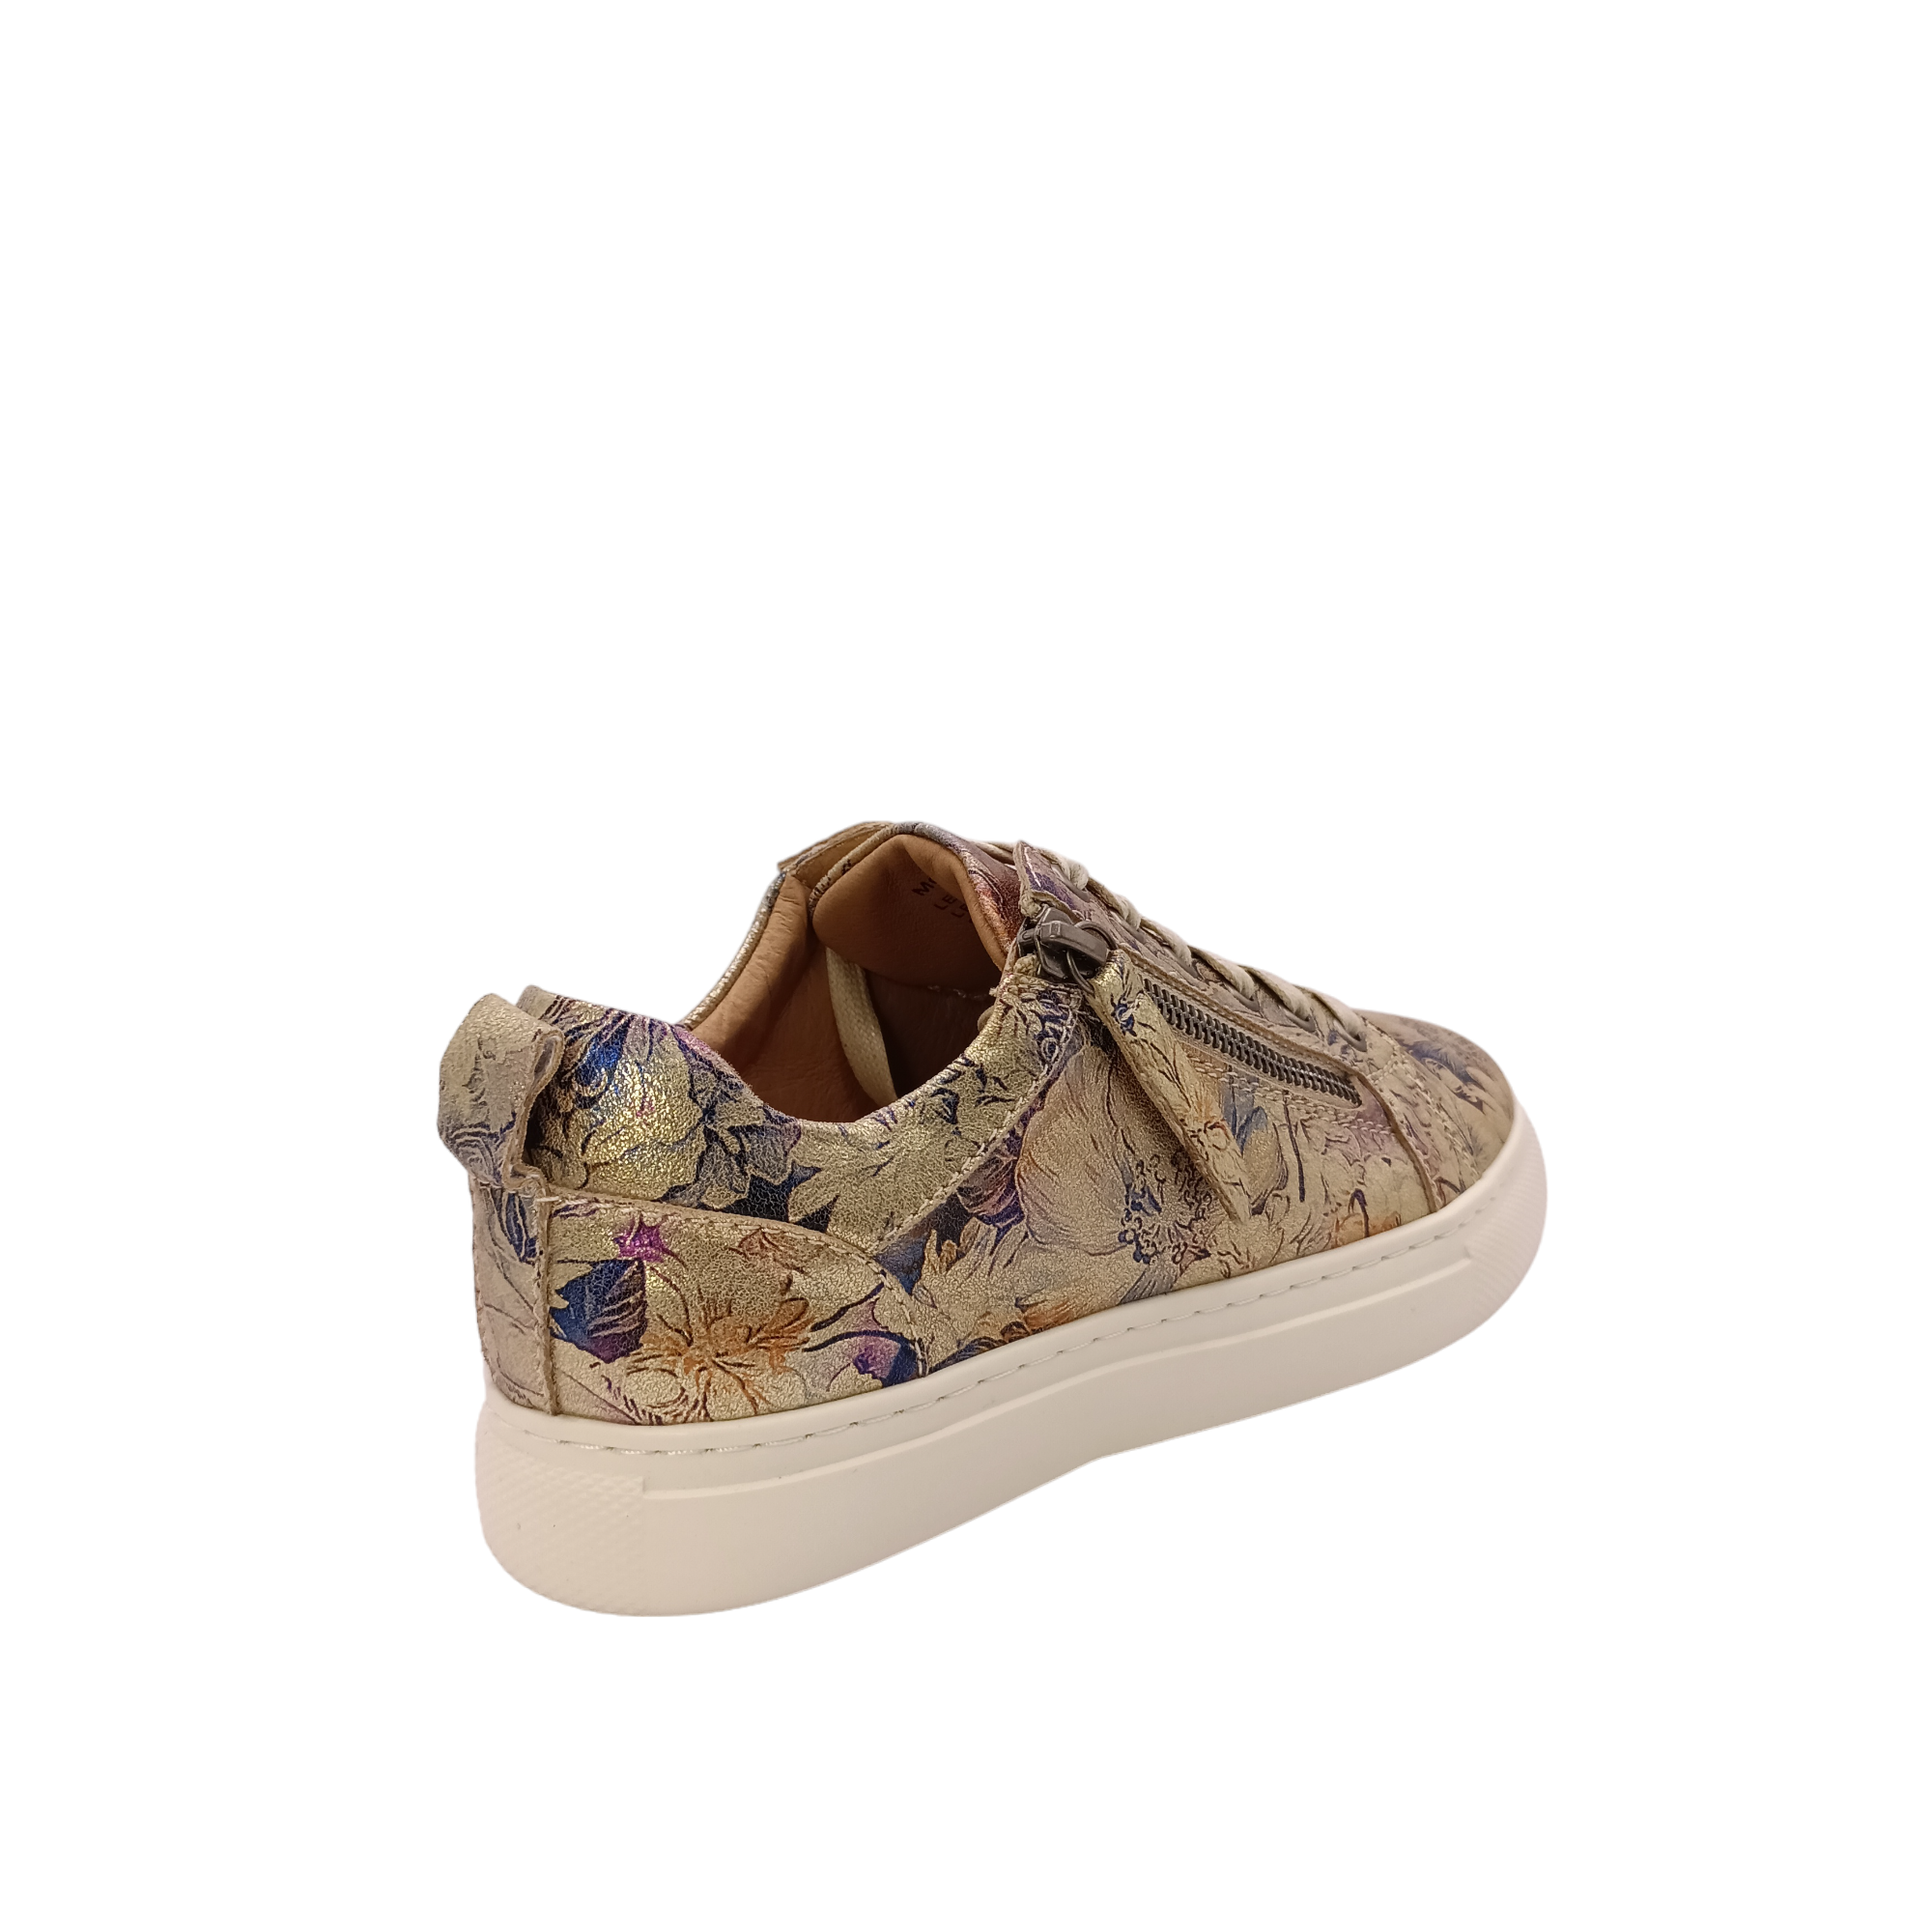 Gold sneaker with side zip. Leather printed floral design with blue, purple and burnt orange patterned floral design. Step into style and comfort with the stunning Cassini shoes. Featuring a unique floral and metallic pattern, these women&#39;s shoes offer the perfect blend of fashion and function. Cassini shoes are sure to become your new go-to for comfortable style